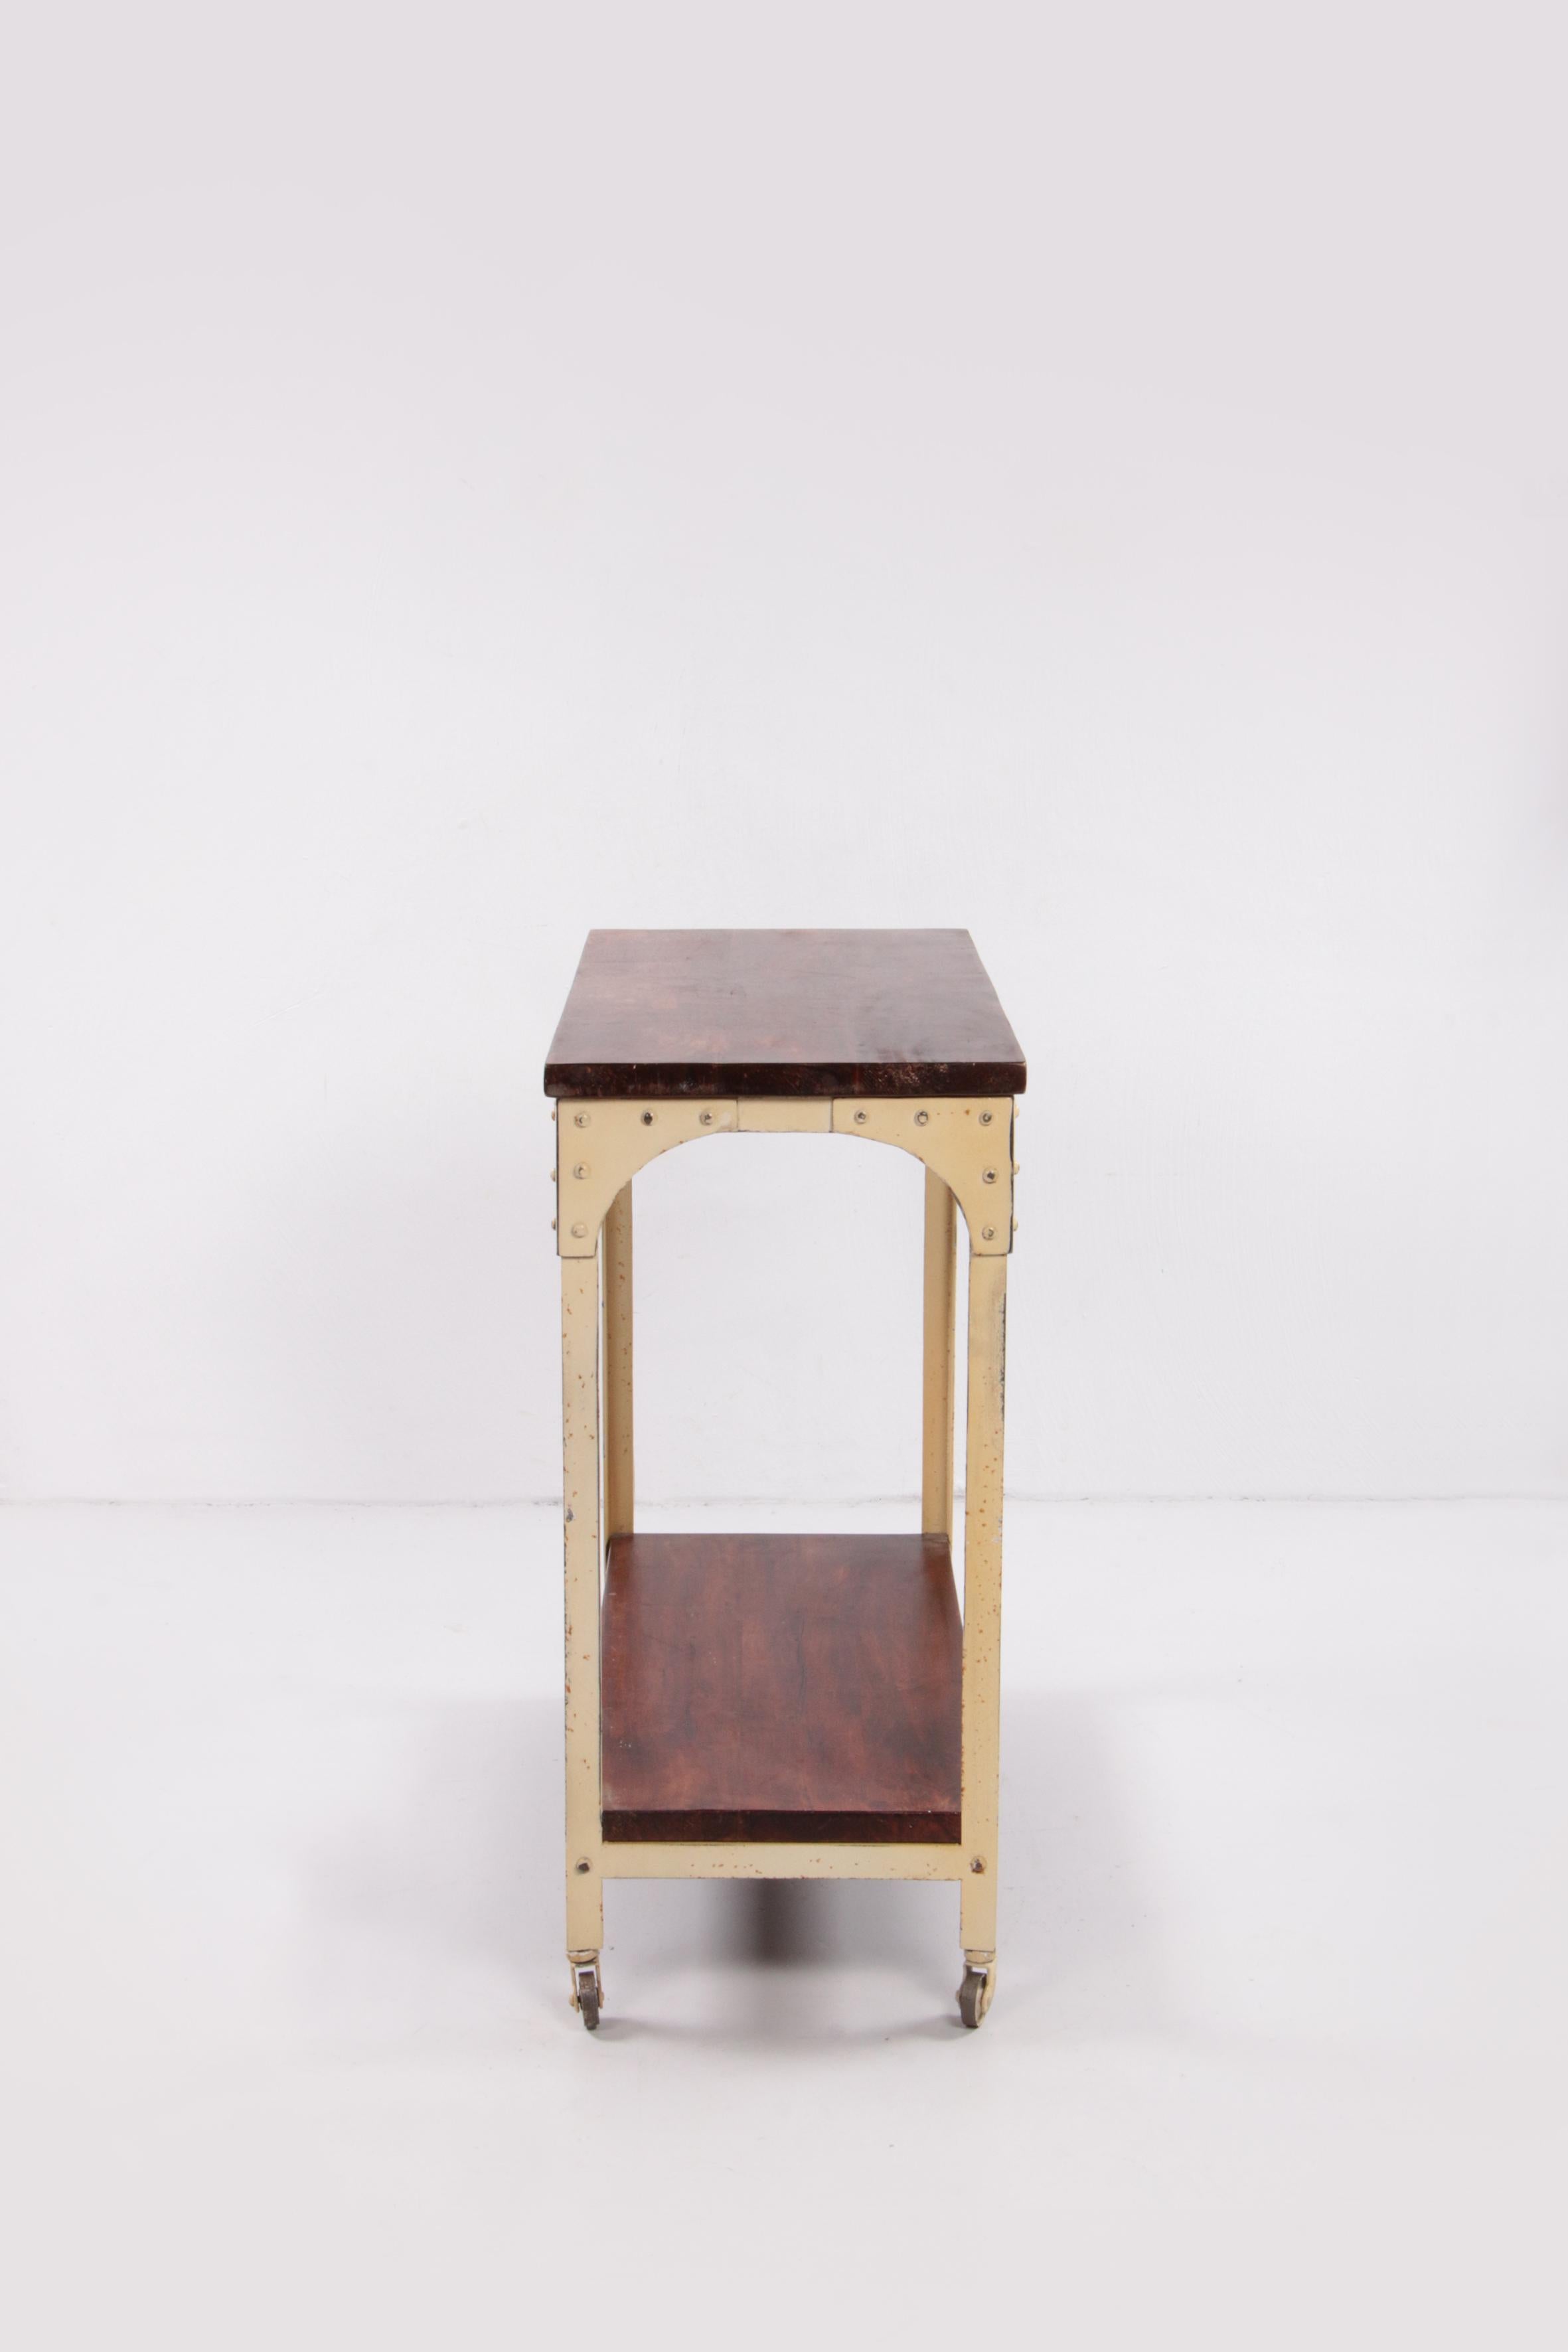 Industrial Robust Side Table Made of Wood and Metal, 1970 England For Sale 4